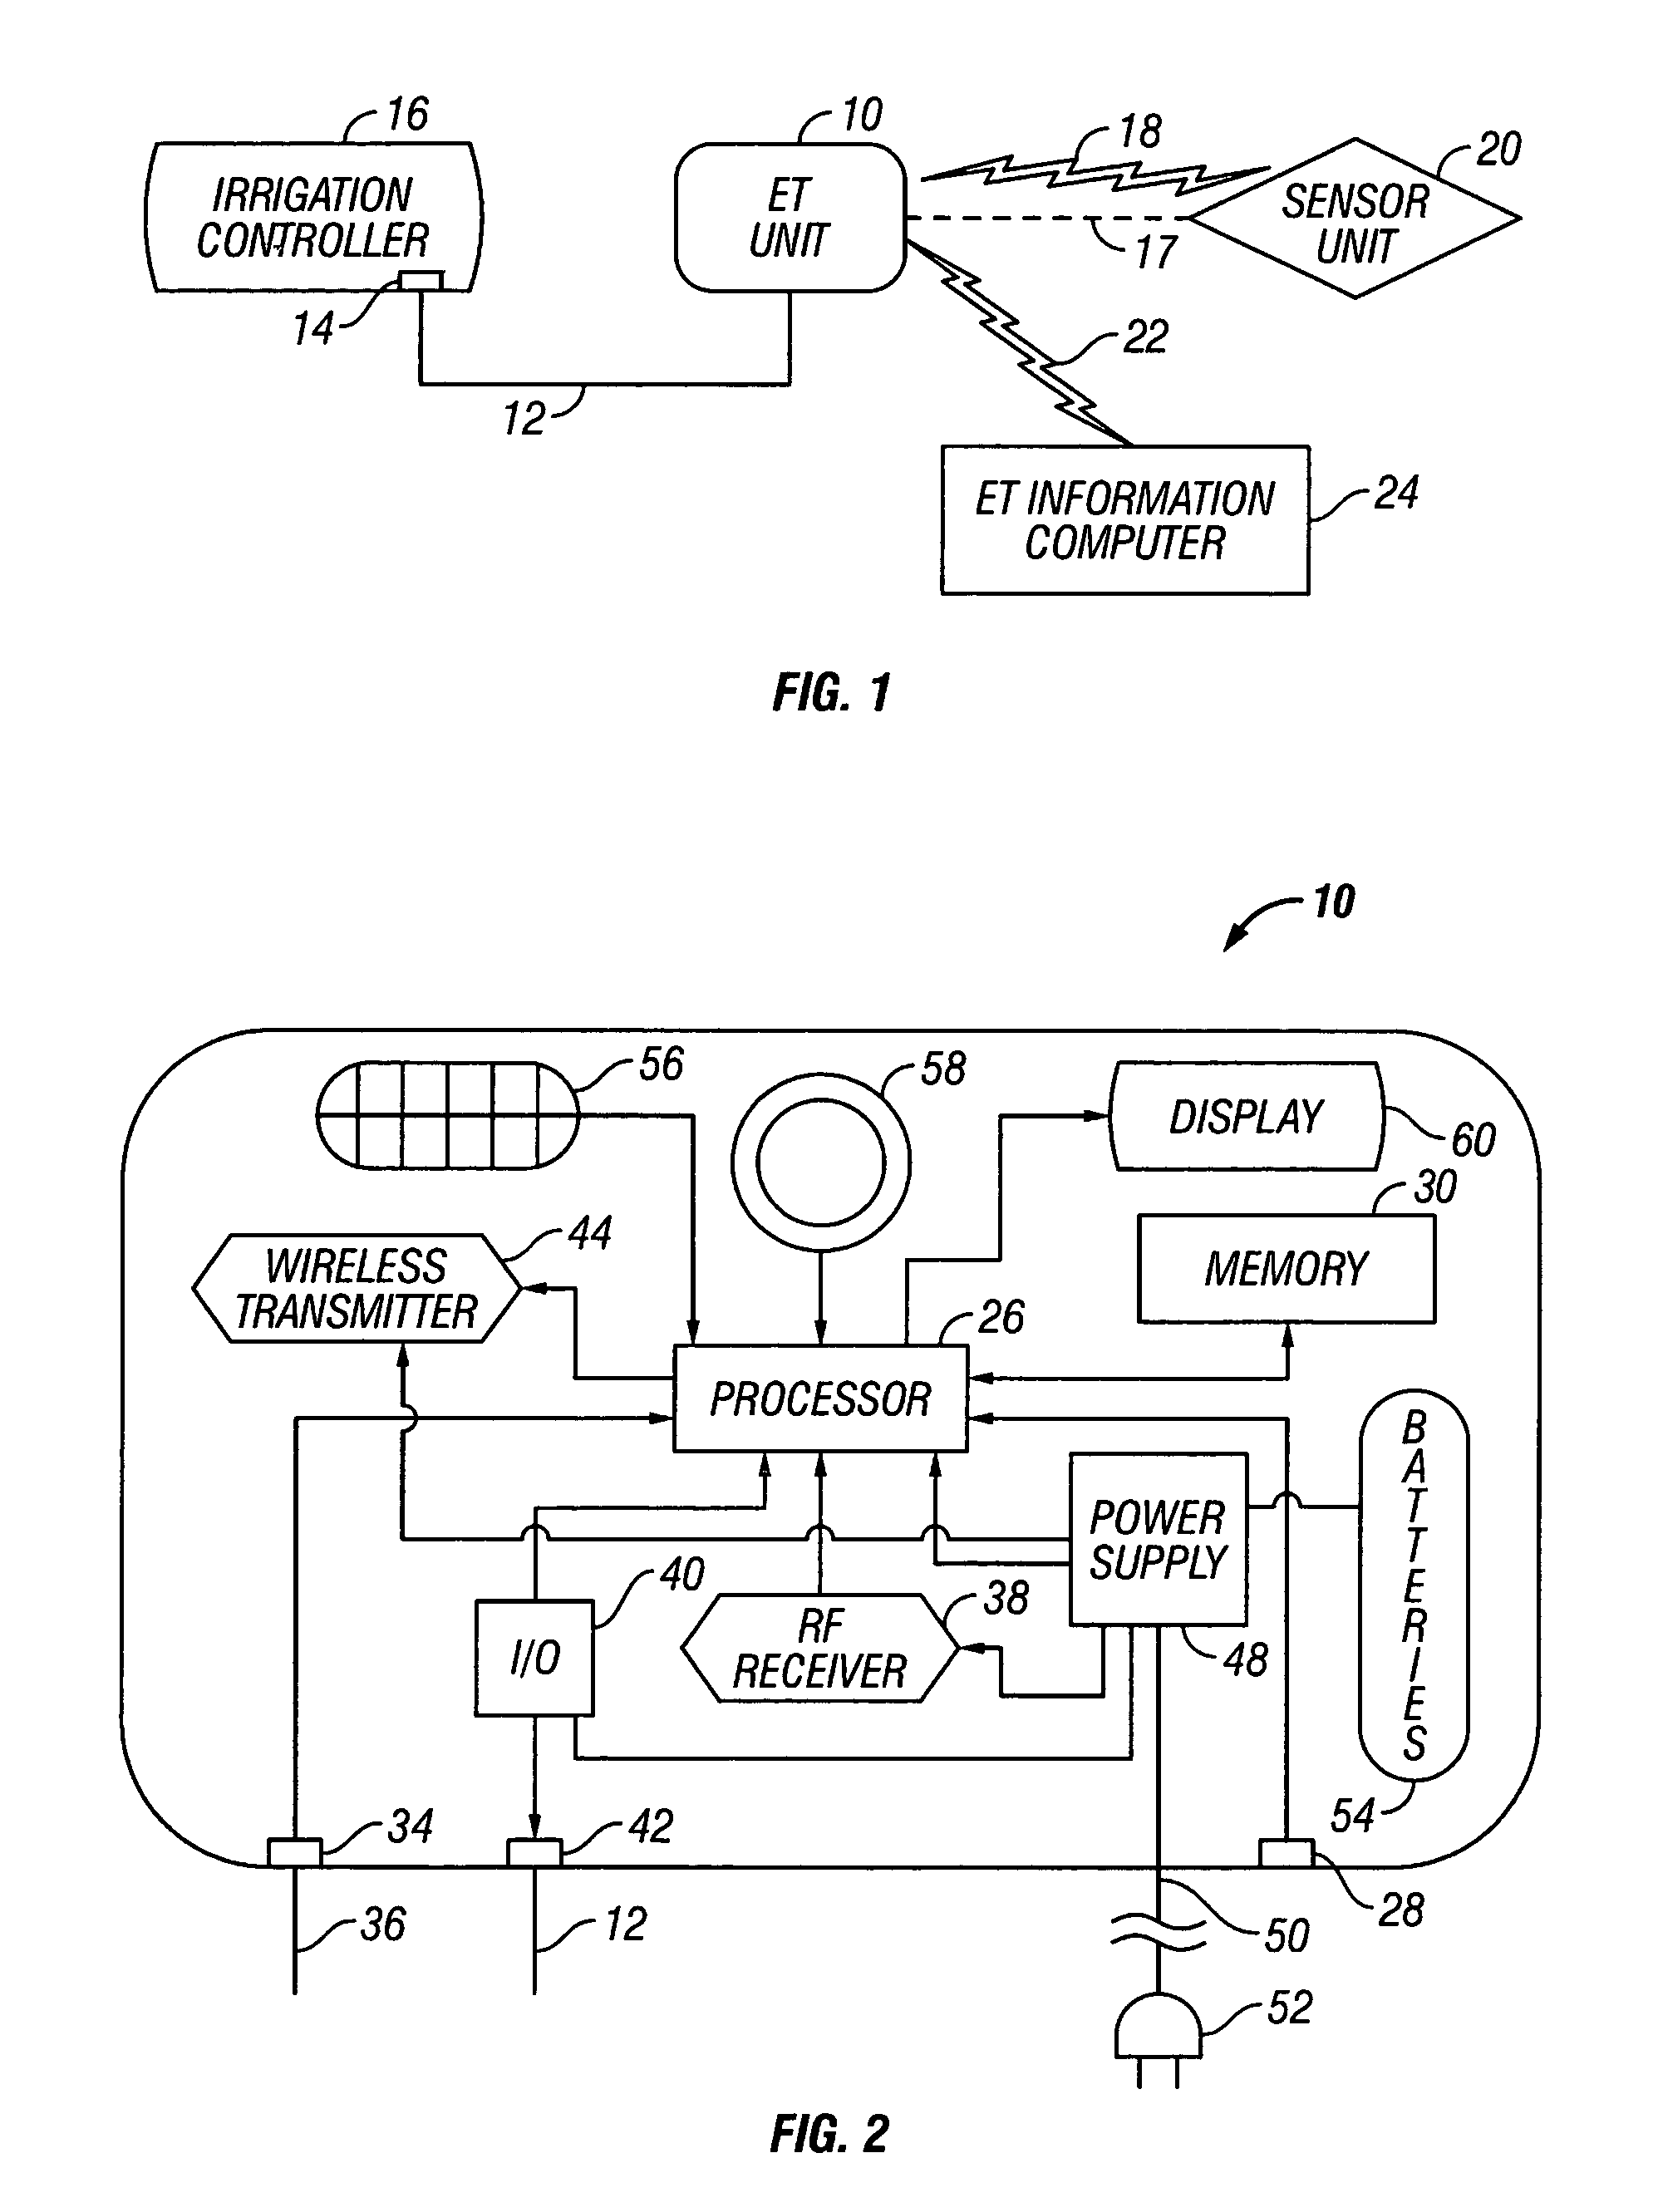 Evapotranspiration unit connectable to an irrigation controller